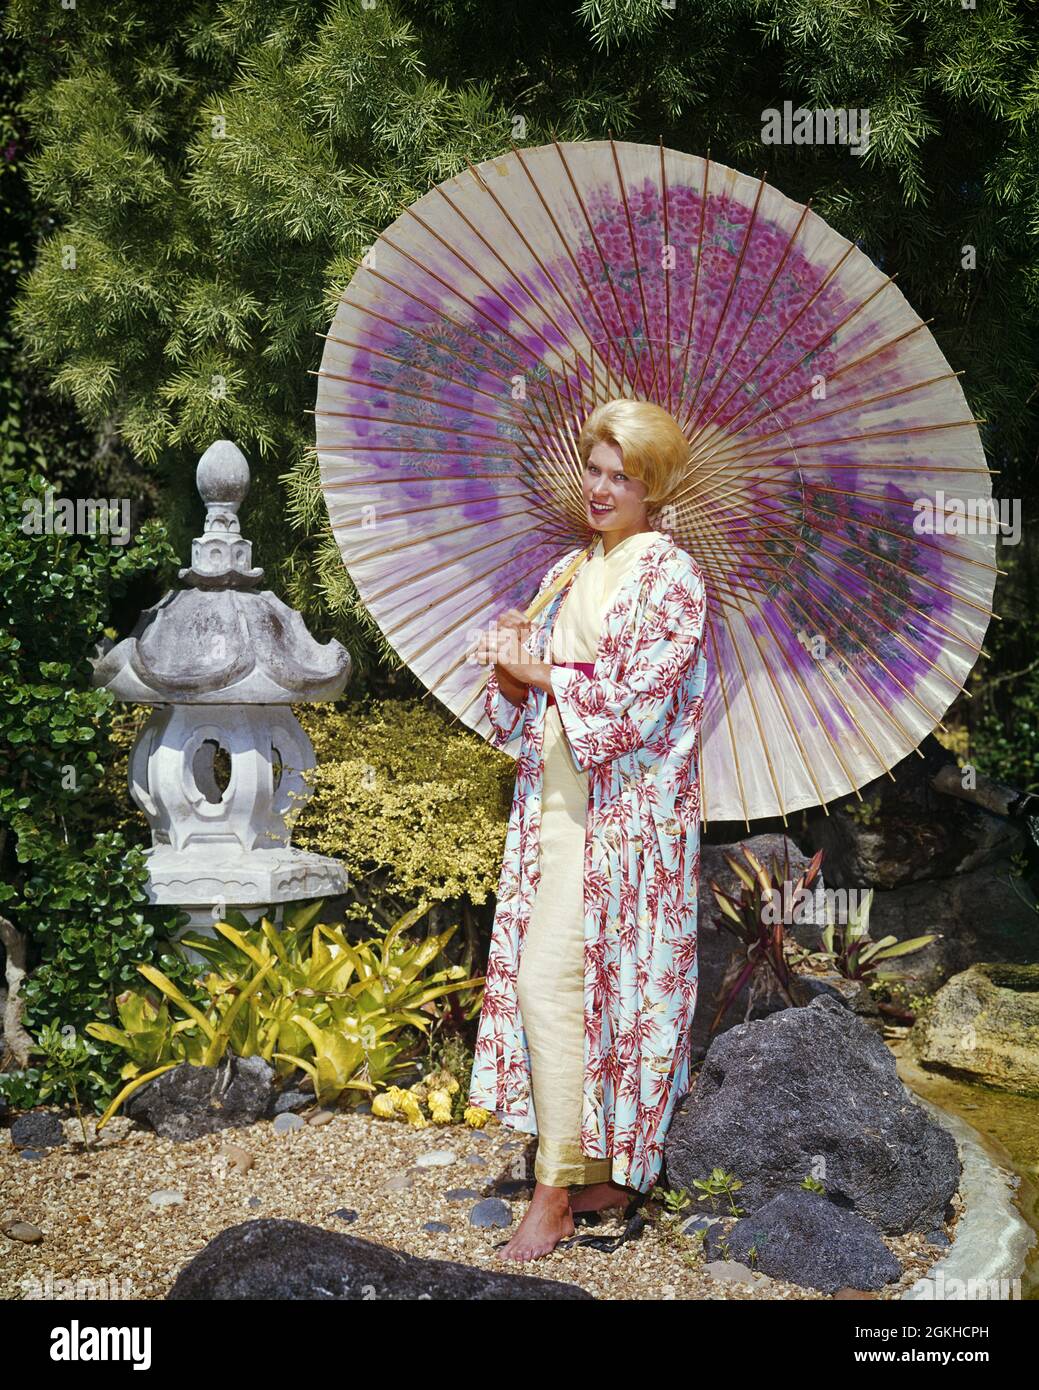 1960s BLONDE WOMAN BOUFFANT HAIRDO STANDING UNDER LARGE PINK PAINTED UMBRELLA SUNNY JAPANESE GARDEN WEAR KIMONO PRINTED ROBE - kg3465 CYP001 HARS ROBE GROWNUP LUXURY FULL-LENGTH PERSONS GROWN-UP CHARACTER SUNNY THEME KIMONO BAMBOO LEISURE ORIENTAL STYLES PAINTED STYLISH ANONYMOUS FASHIONS HAIRDO PEOPLE ADULTS YOUNG ADULT WOMAN BOUFFANT CAUCASIAN ETHNICITY EXOTIC HANDMADE OLD FASHIONED PRINTED Stock Photo